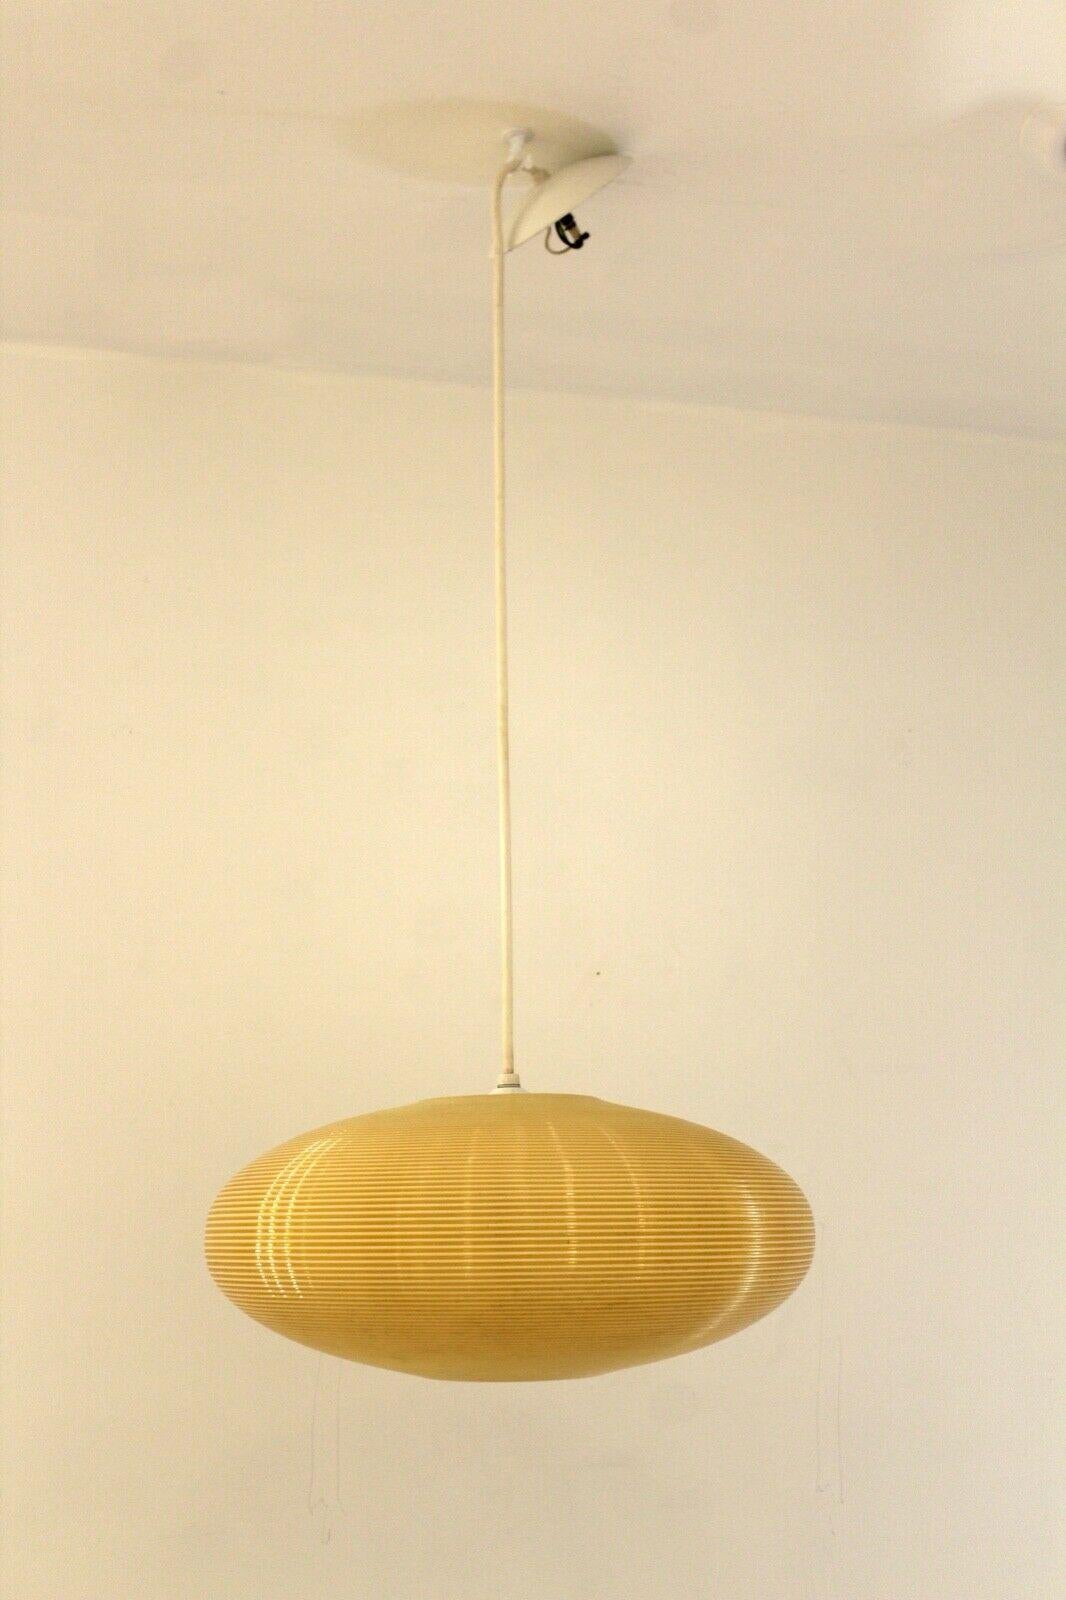 From Le Shoppe Too in Michigan comes this Mid Century Modern ceiling light or lamp designed by Yasha Heifetz for Heifetz Rotaflex, a German designer and manufacturer iconically known for its use of ABS spun plastic. This particular ceiling light